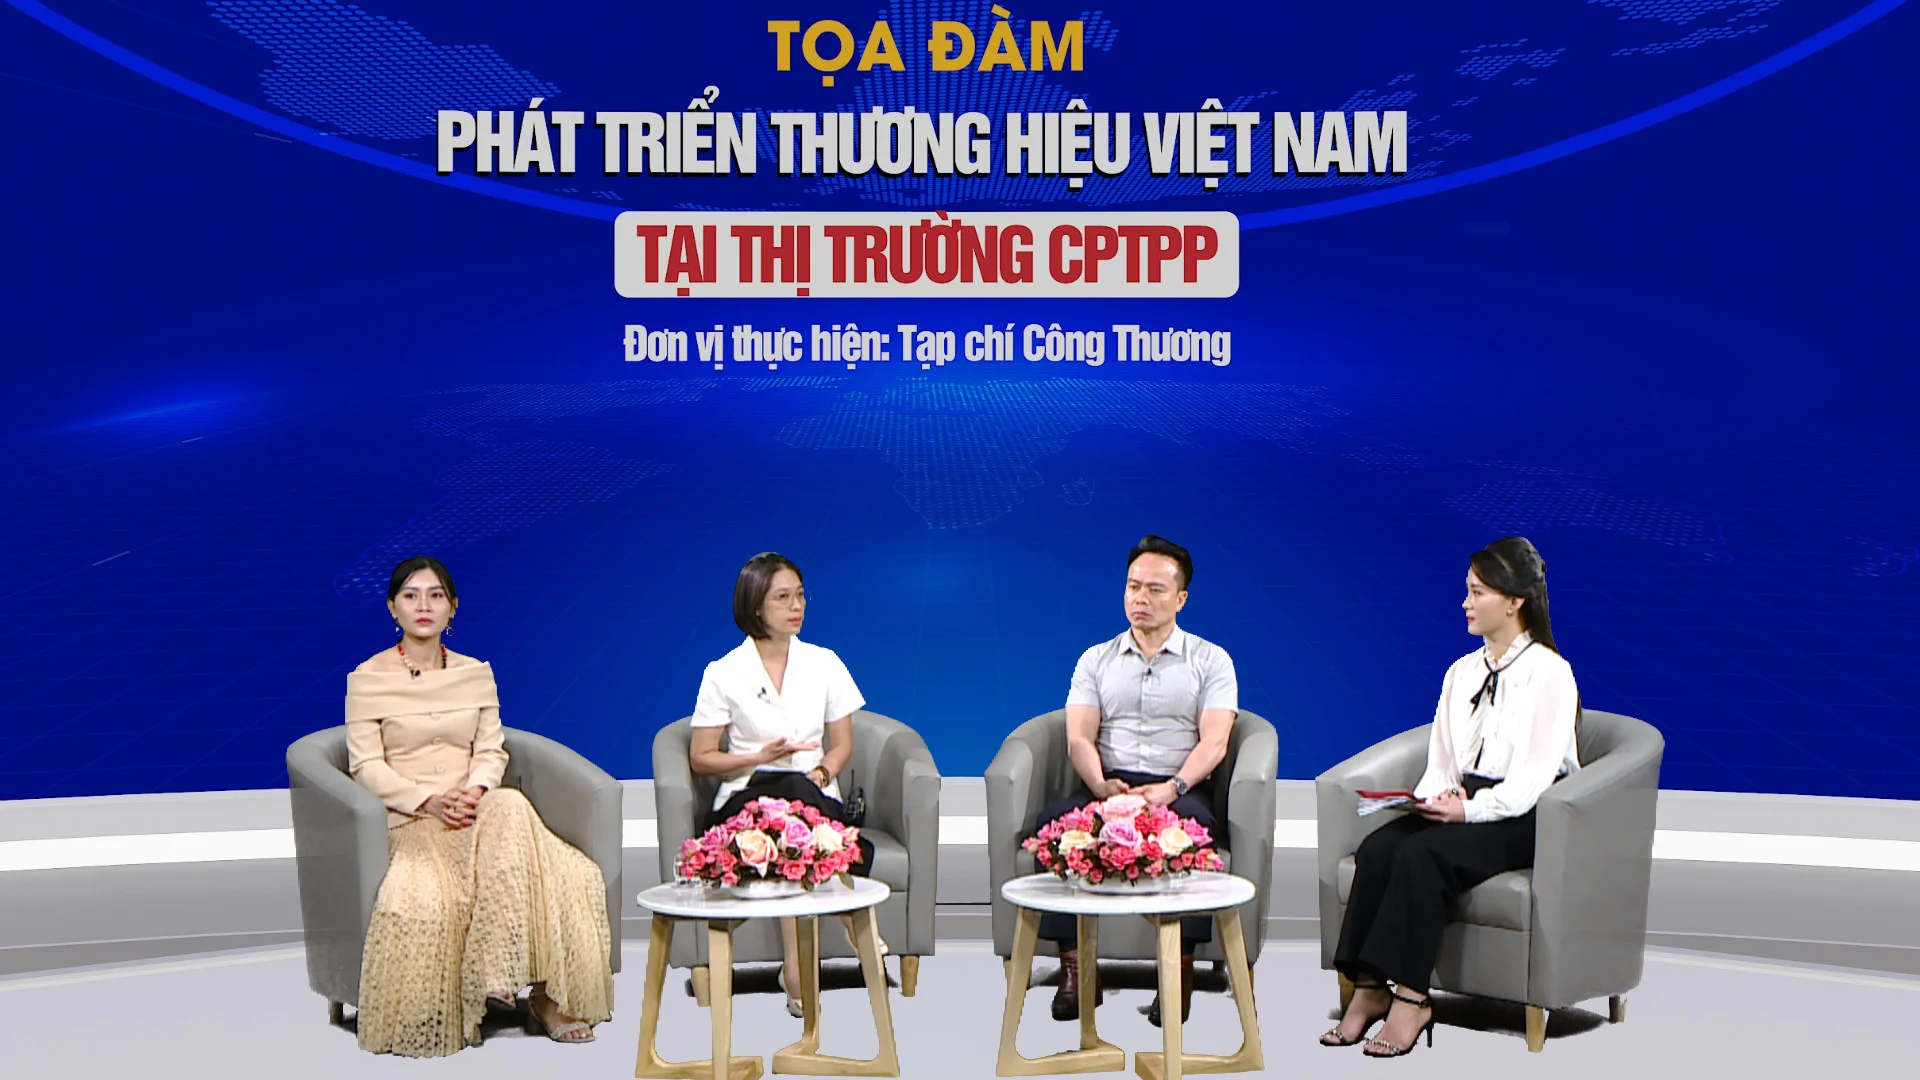 Speakers at the Vietnam Brand Development Seminar in the CPTPP market said that the fiscal space for Vietnamese products is still huge.